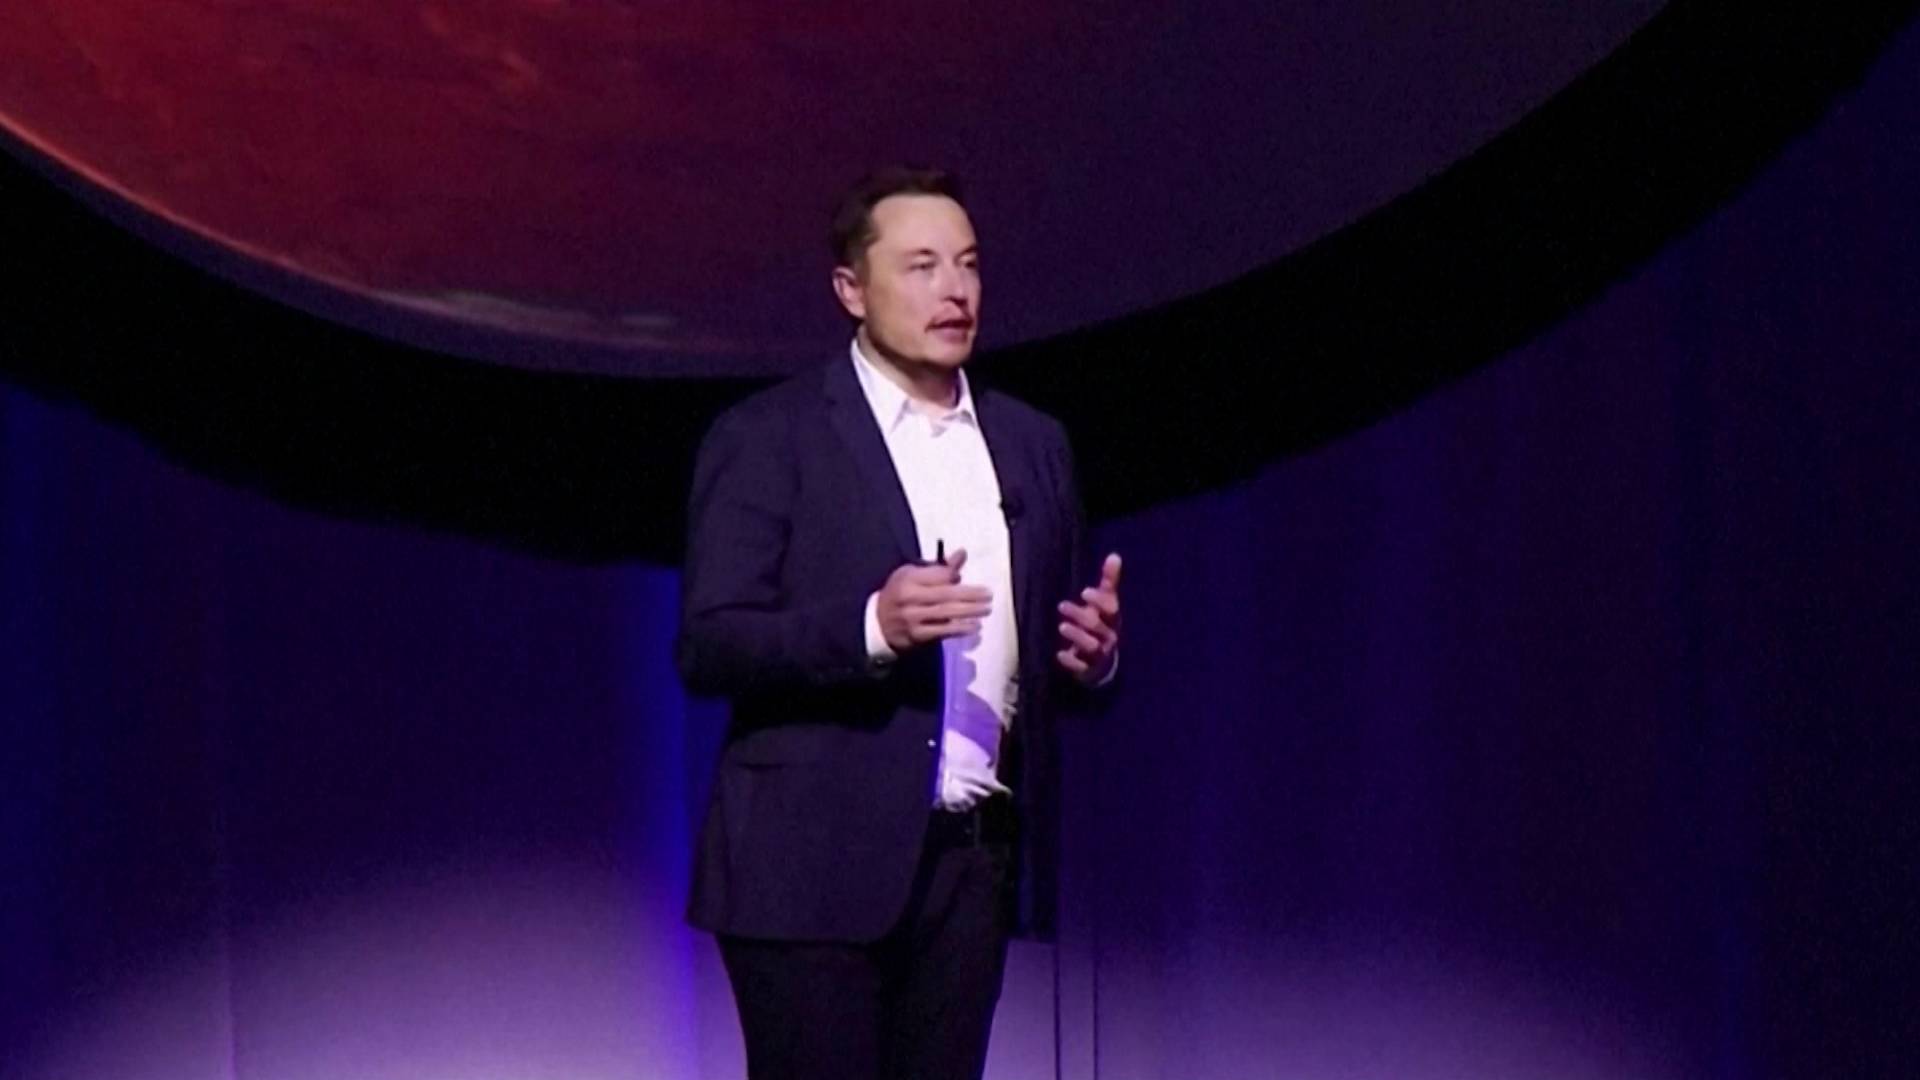 Elon Musk Has Lost $100 Billion in 2022 But Remains World’s Richest Person